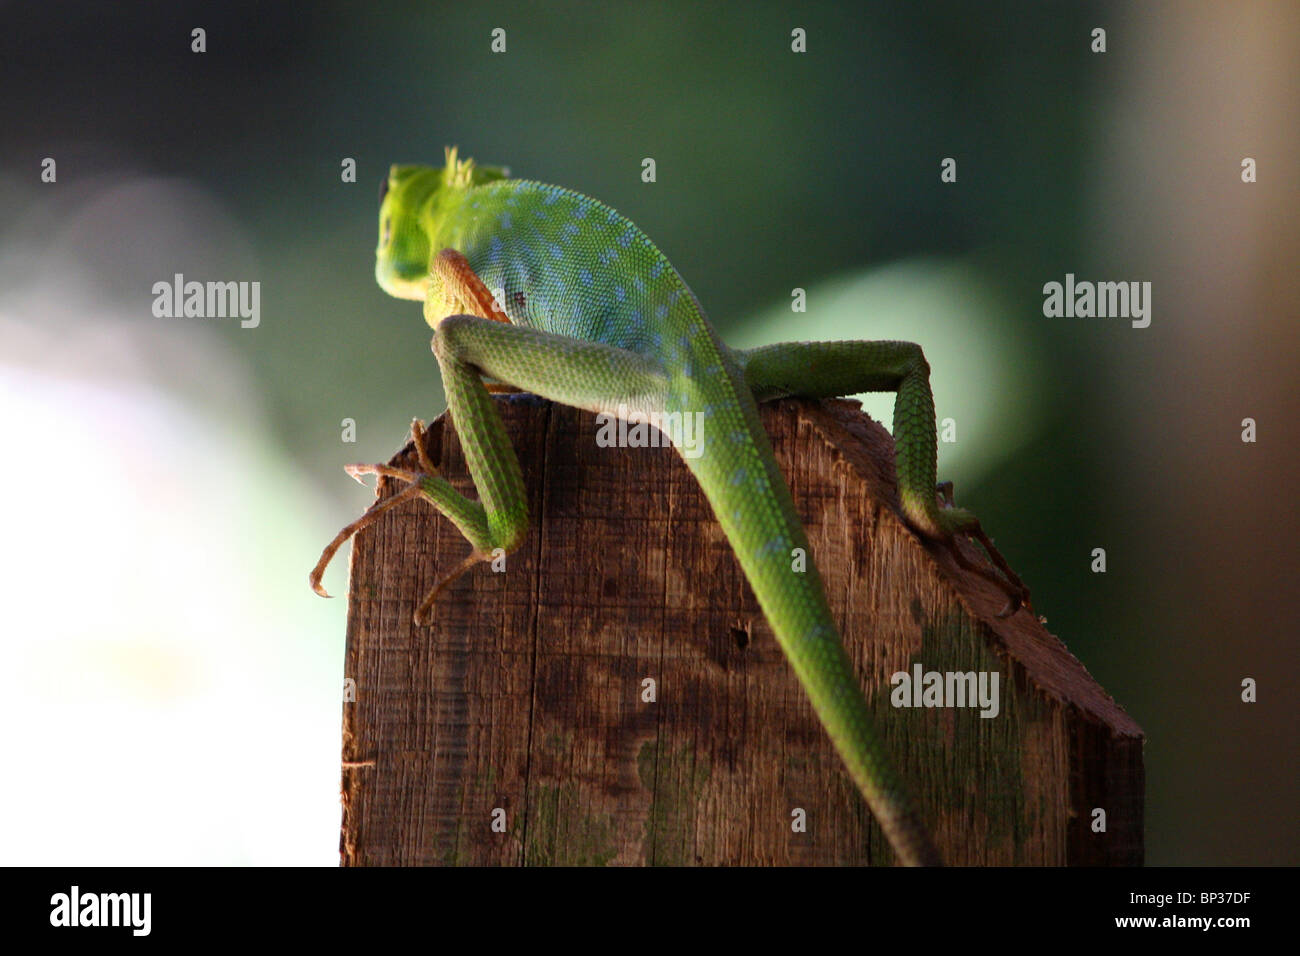 Green lizard sitting on a post in the rainforest Stock Photo